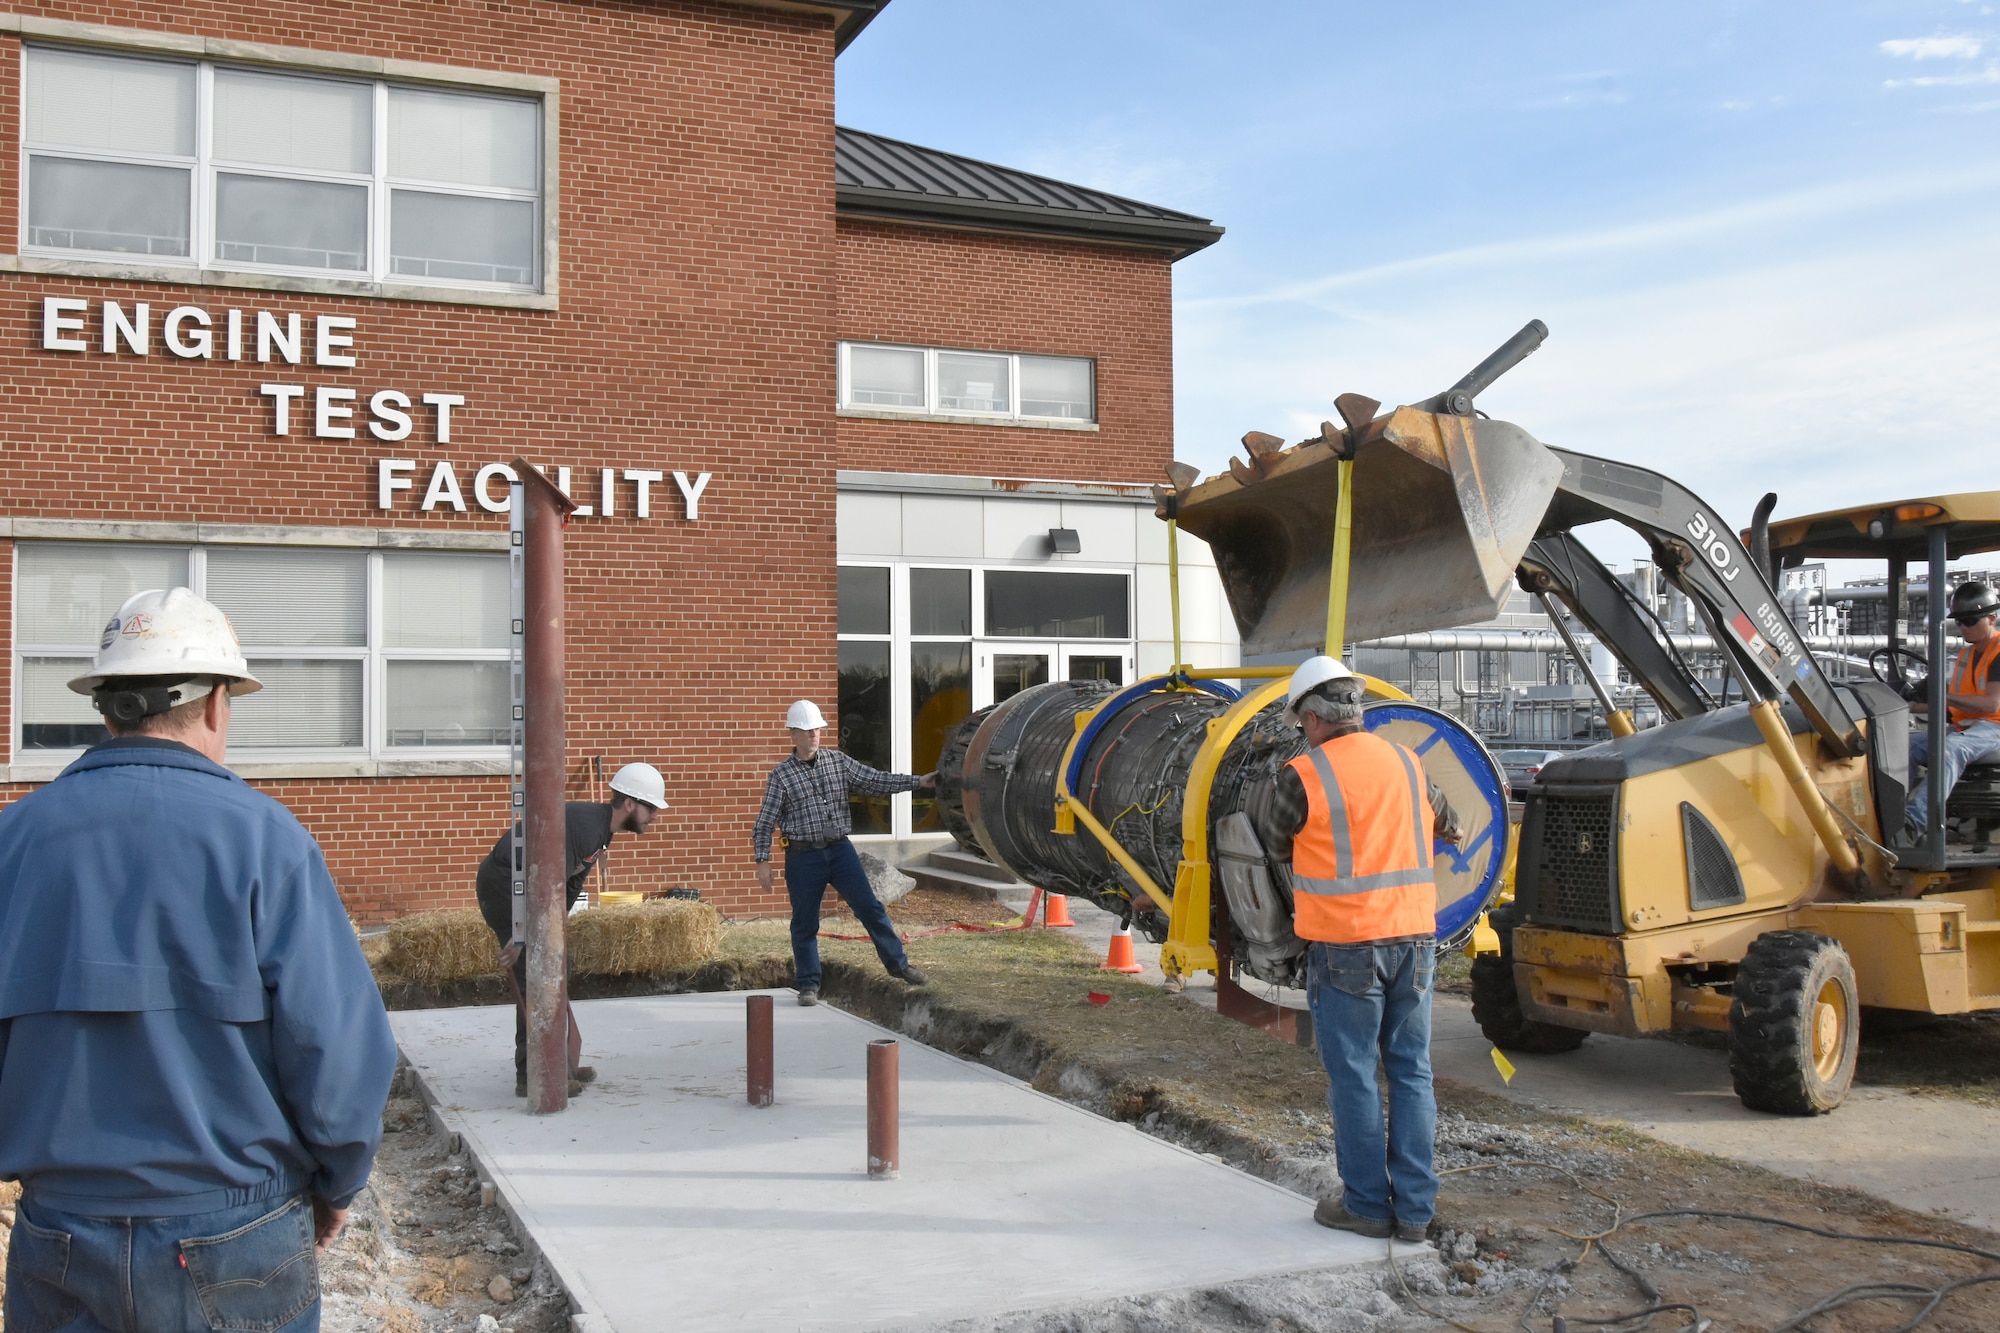 Workers with Henley Construction and Welding Unlimited install an F100 engine for display outside of the Engine Test Facility at Arnold Air Force Base. The installation of the display was completed in late 2019 and coincided with the 50th anniversary of the first operation at Arnold AFB involving the F100, which occurred on Dec. 18, 1969. Since then, Arnold Engineering Development Complex has logged over 23,000 hours testing the F100 series of engines in numerous test facilities. (U.S. Air Force photo by Bradley Hicks) (This image was altered by obscuring badges for security purposes.)